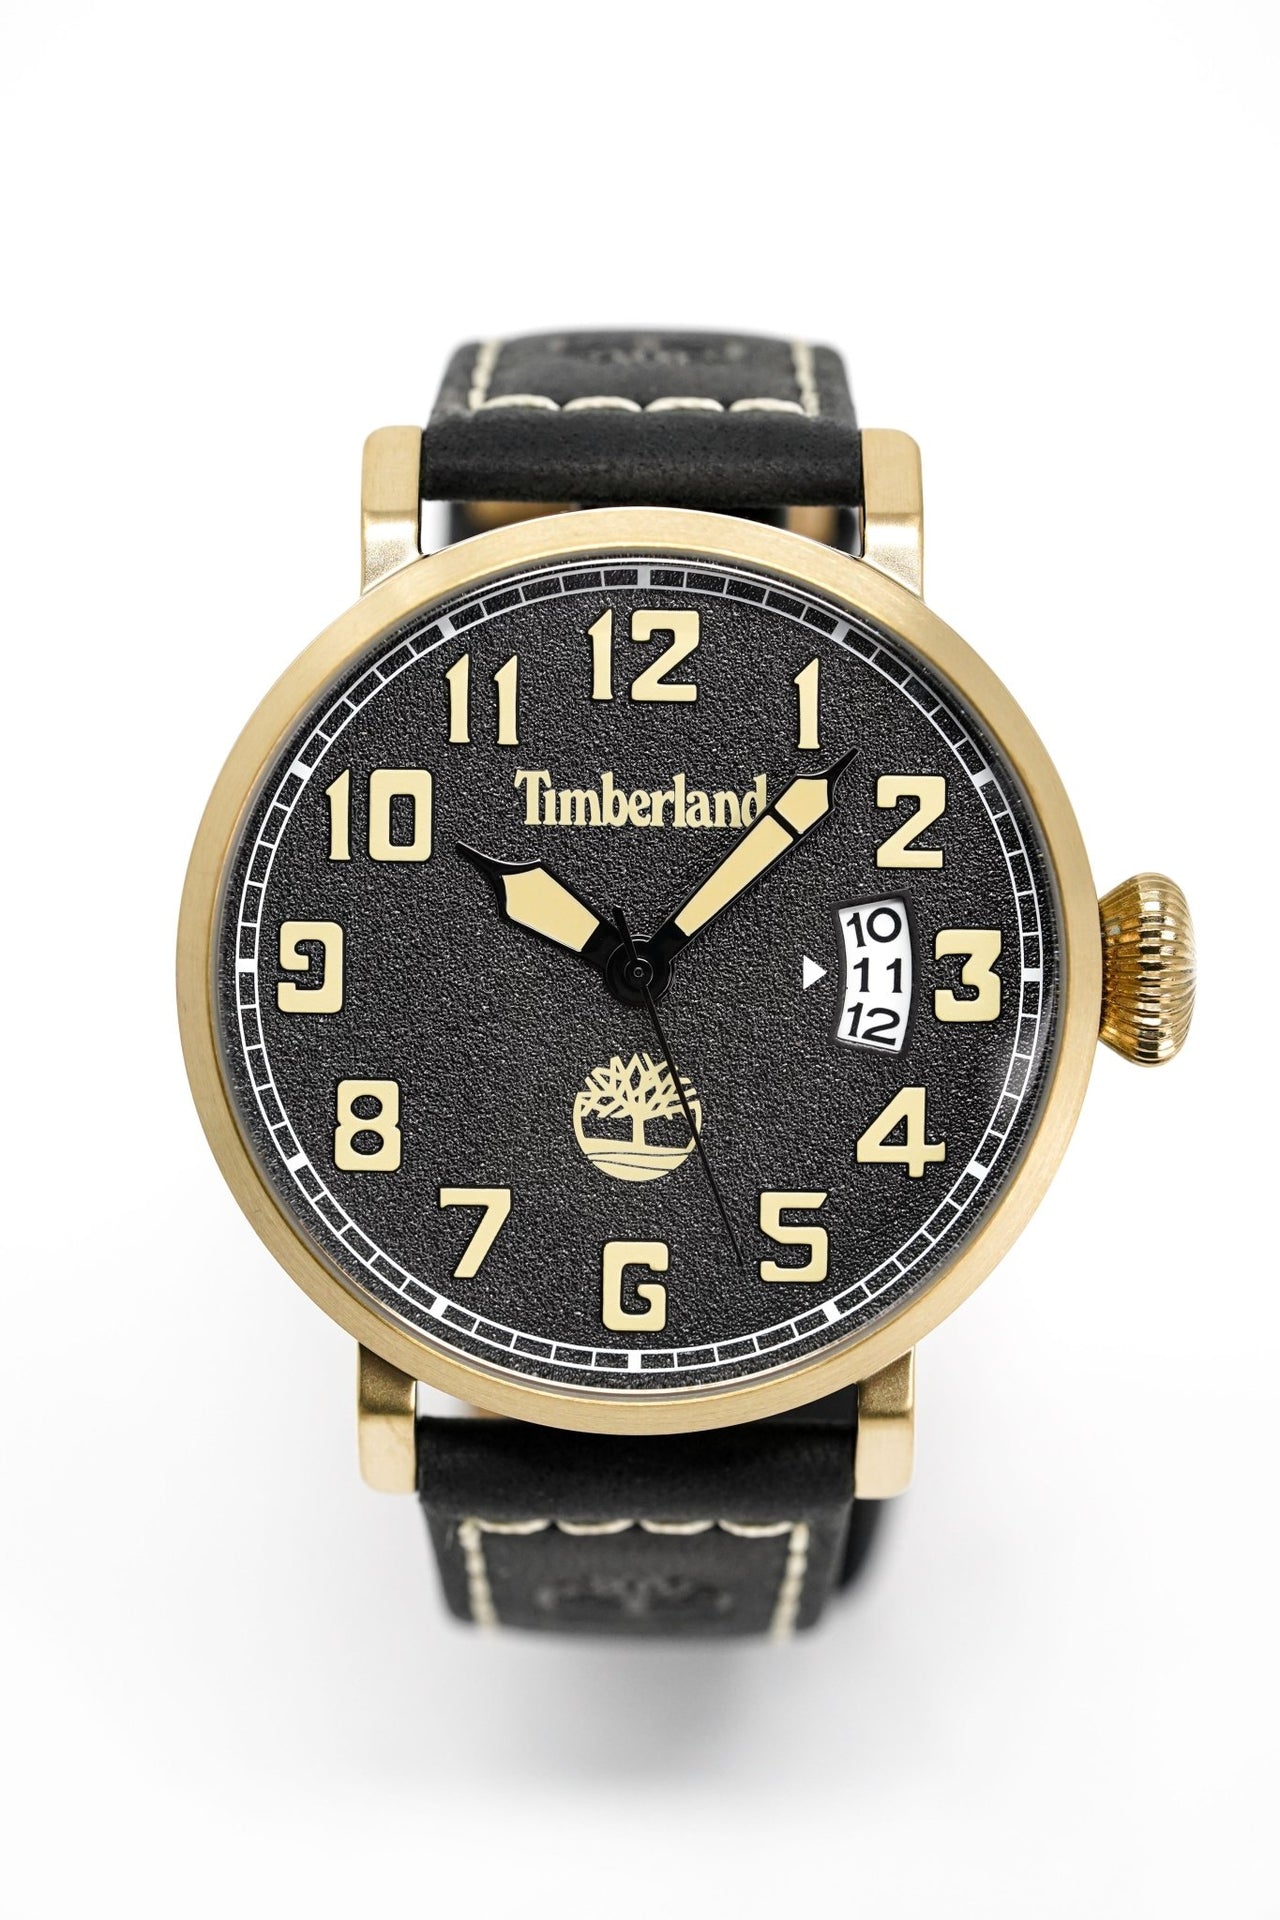 Timberland Men's Watch Date Indicator TBL.14861JSK/02 - Watches & Crystals